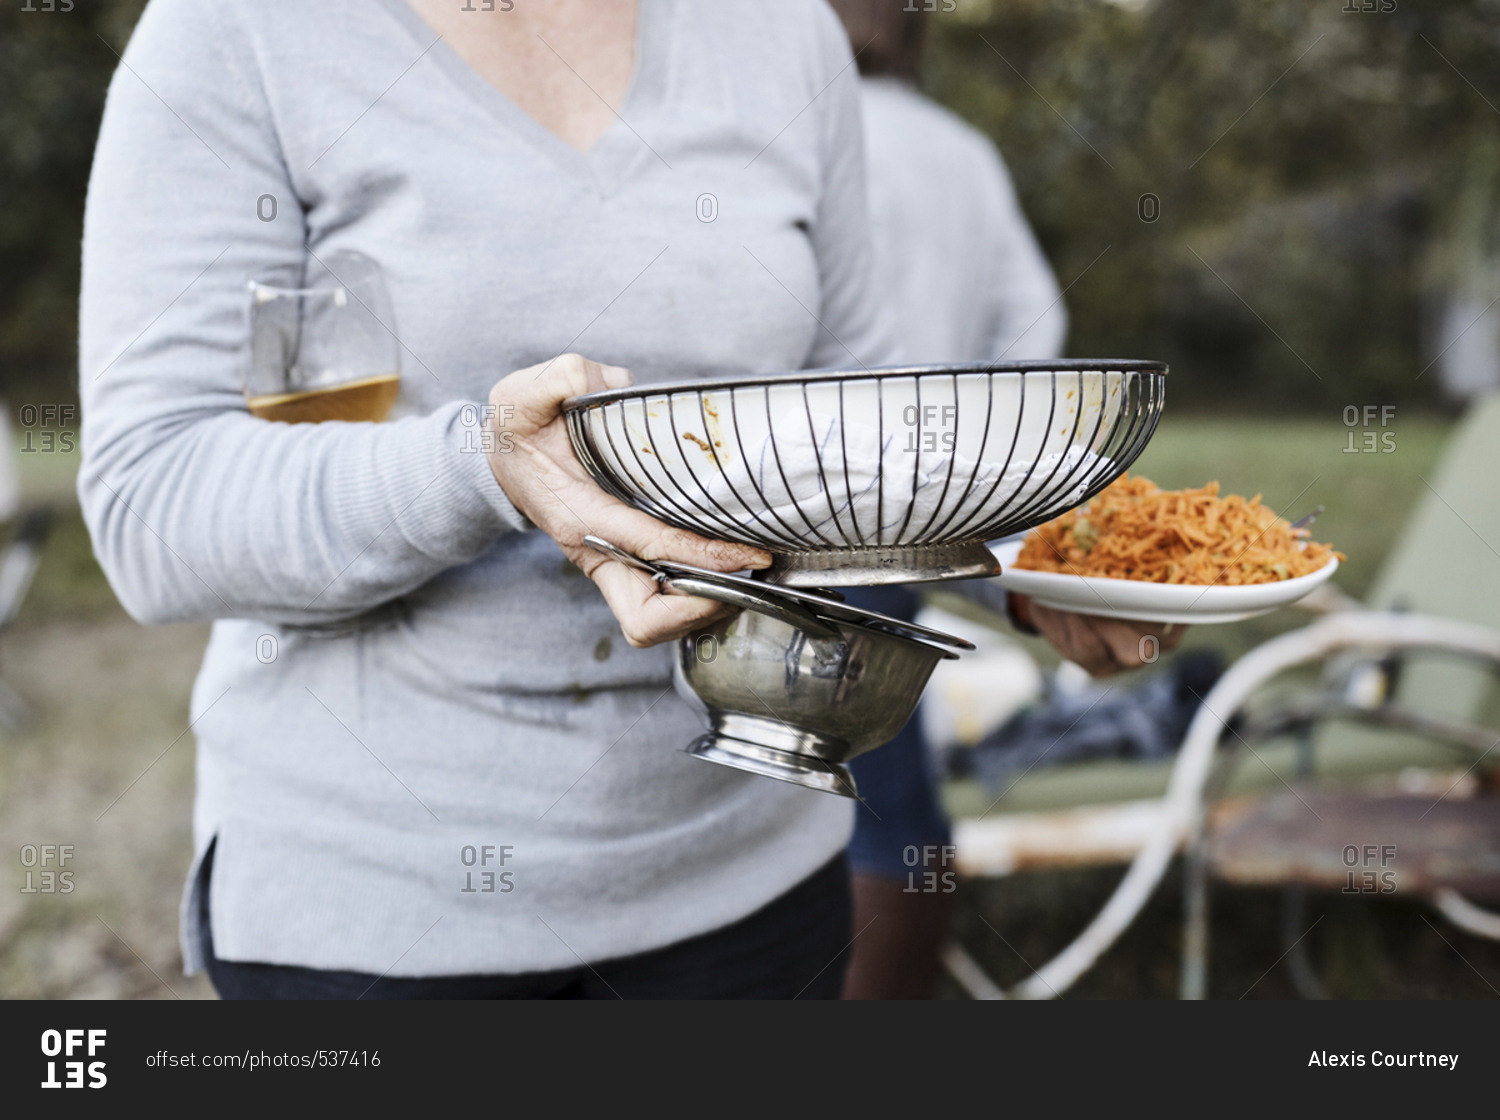 Woman with hands full carrying serving dishes at outdoor dinner